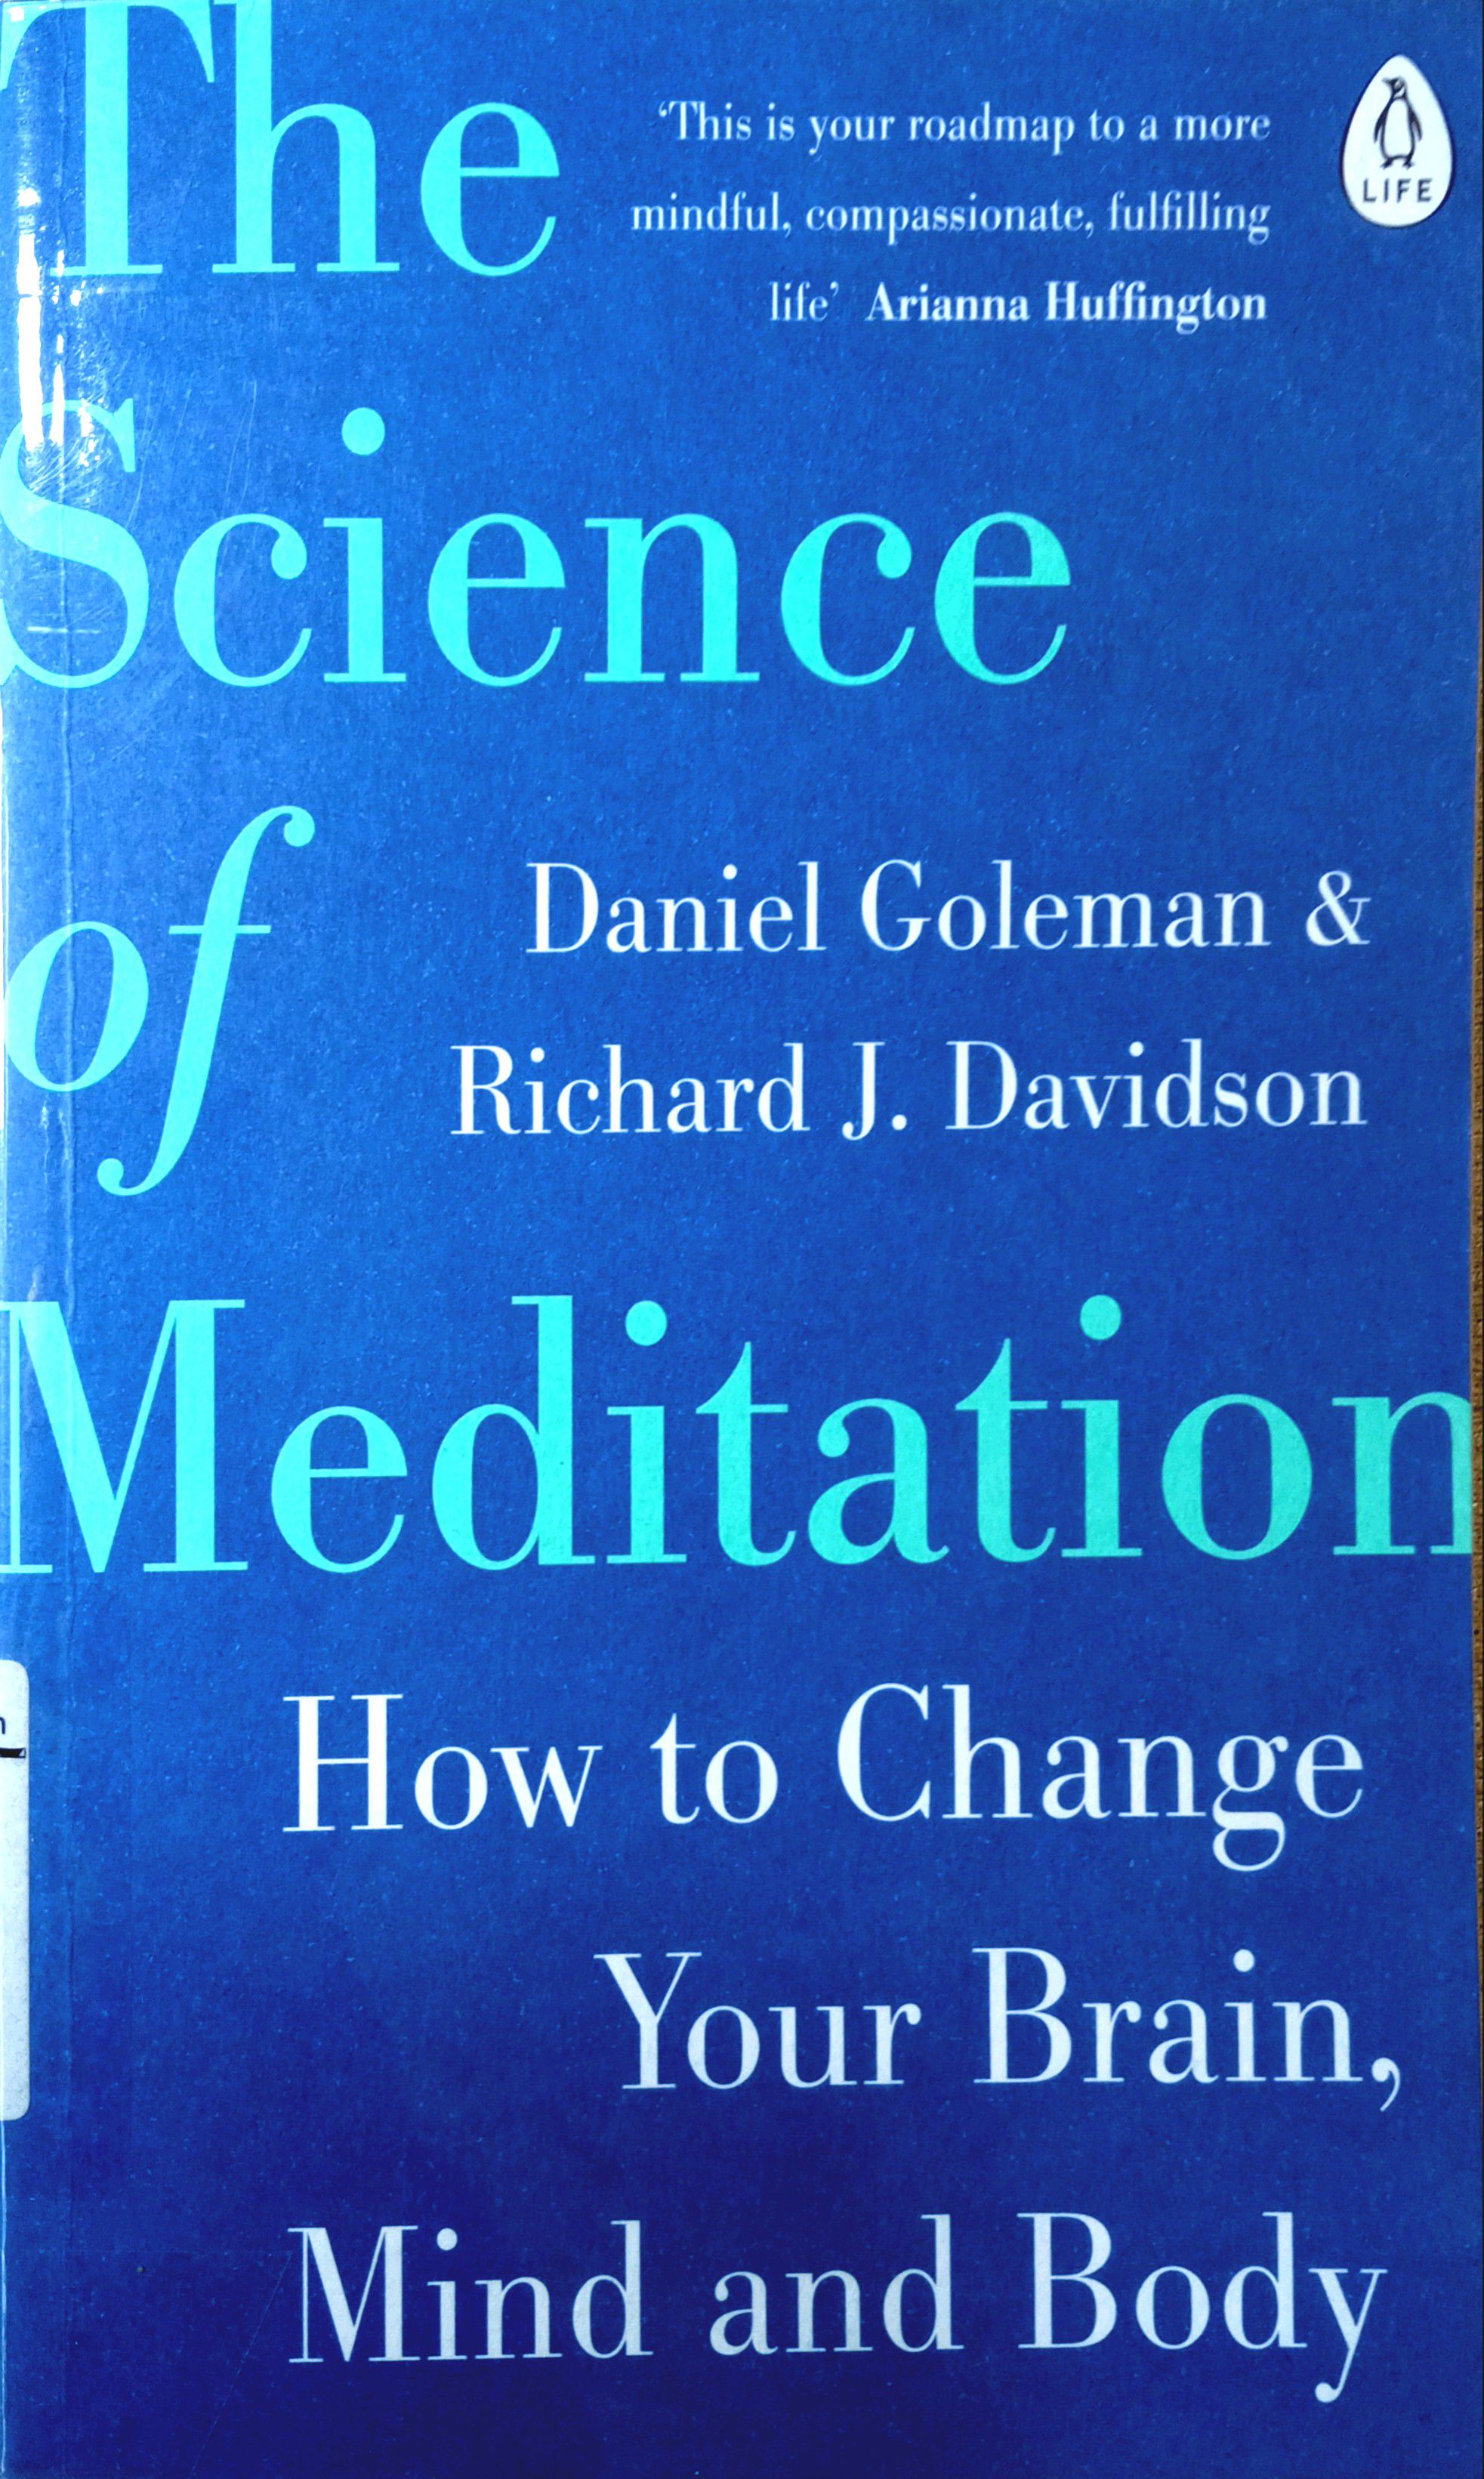 THE SCIENCE OF MEDITATION